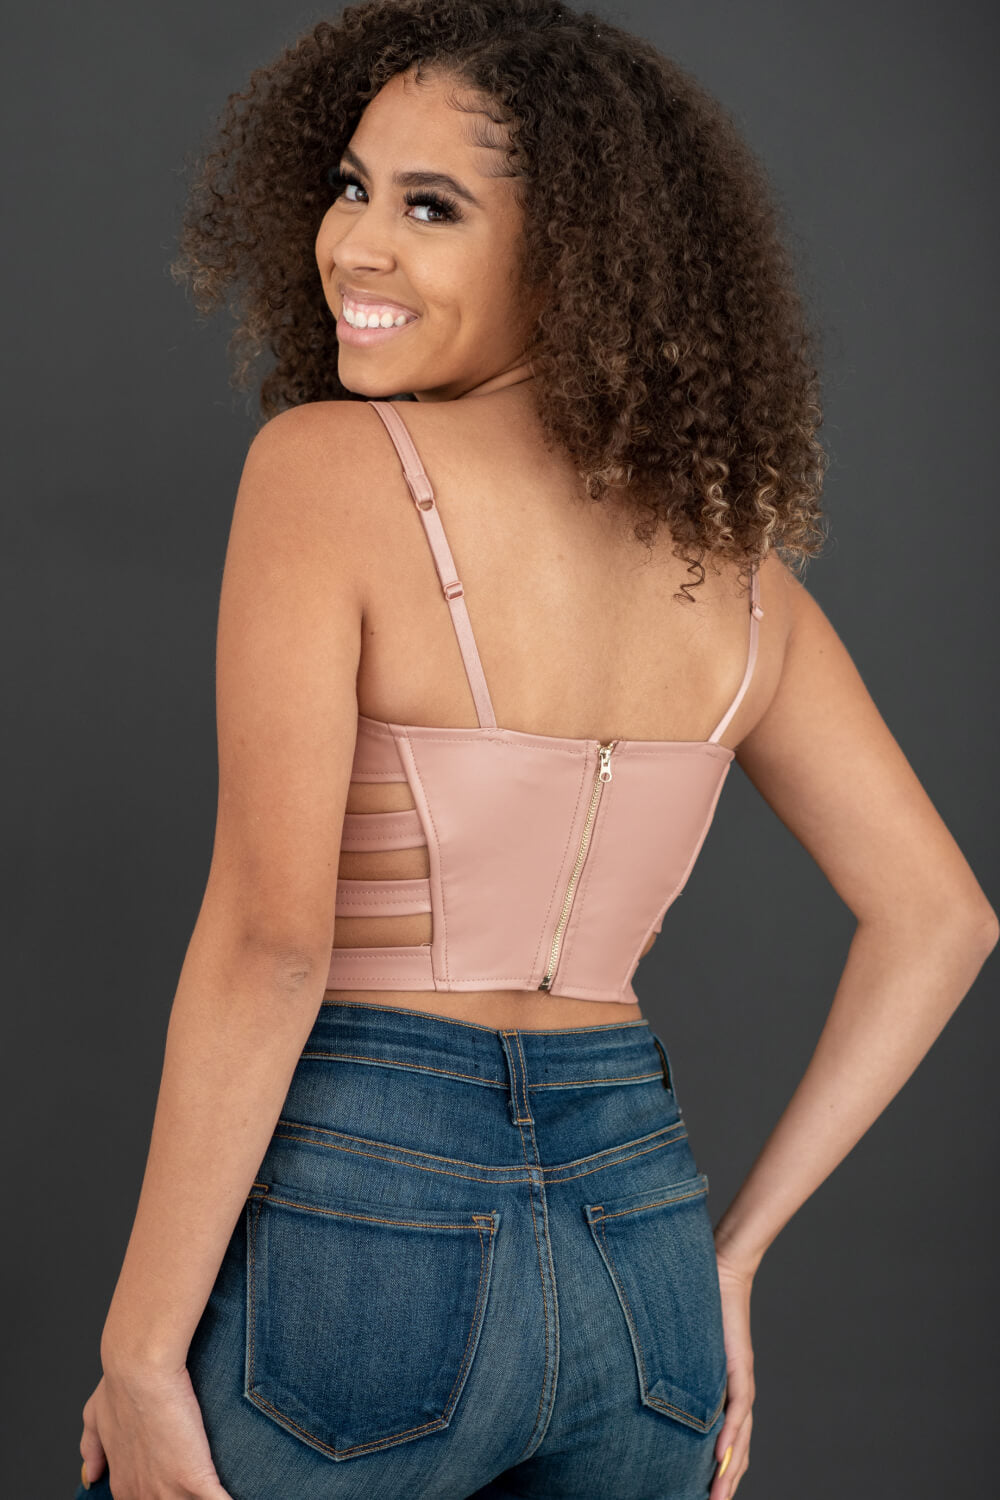 SHOPIRISBASIC Ready to Go Faux Leather Strappy Bustier Crop Top